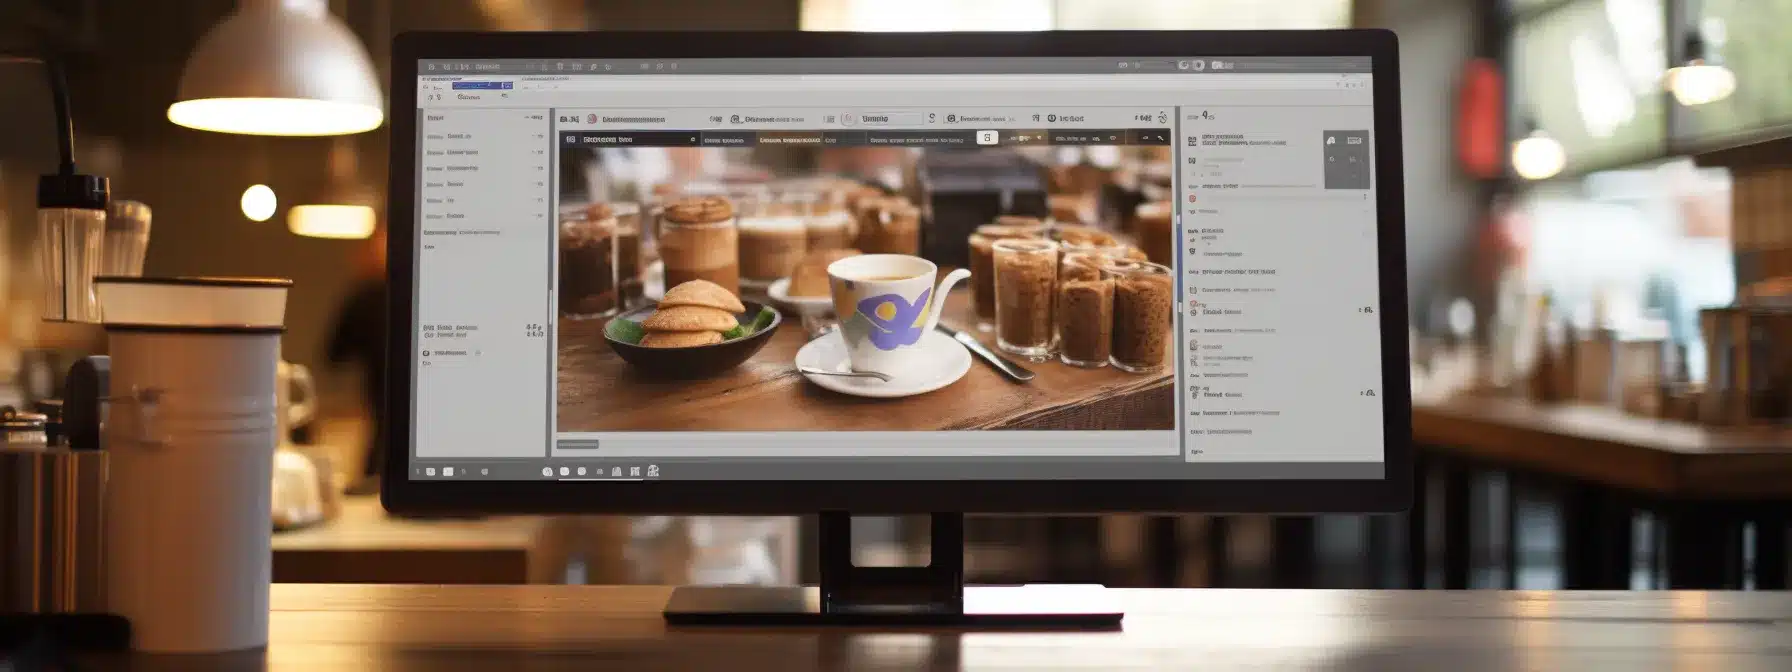 A Well-Targeted Google Ad Displayed On A Computer Screen With A Coffee Shop Logo In The Background.